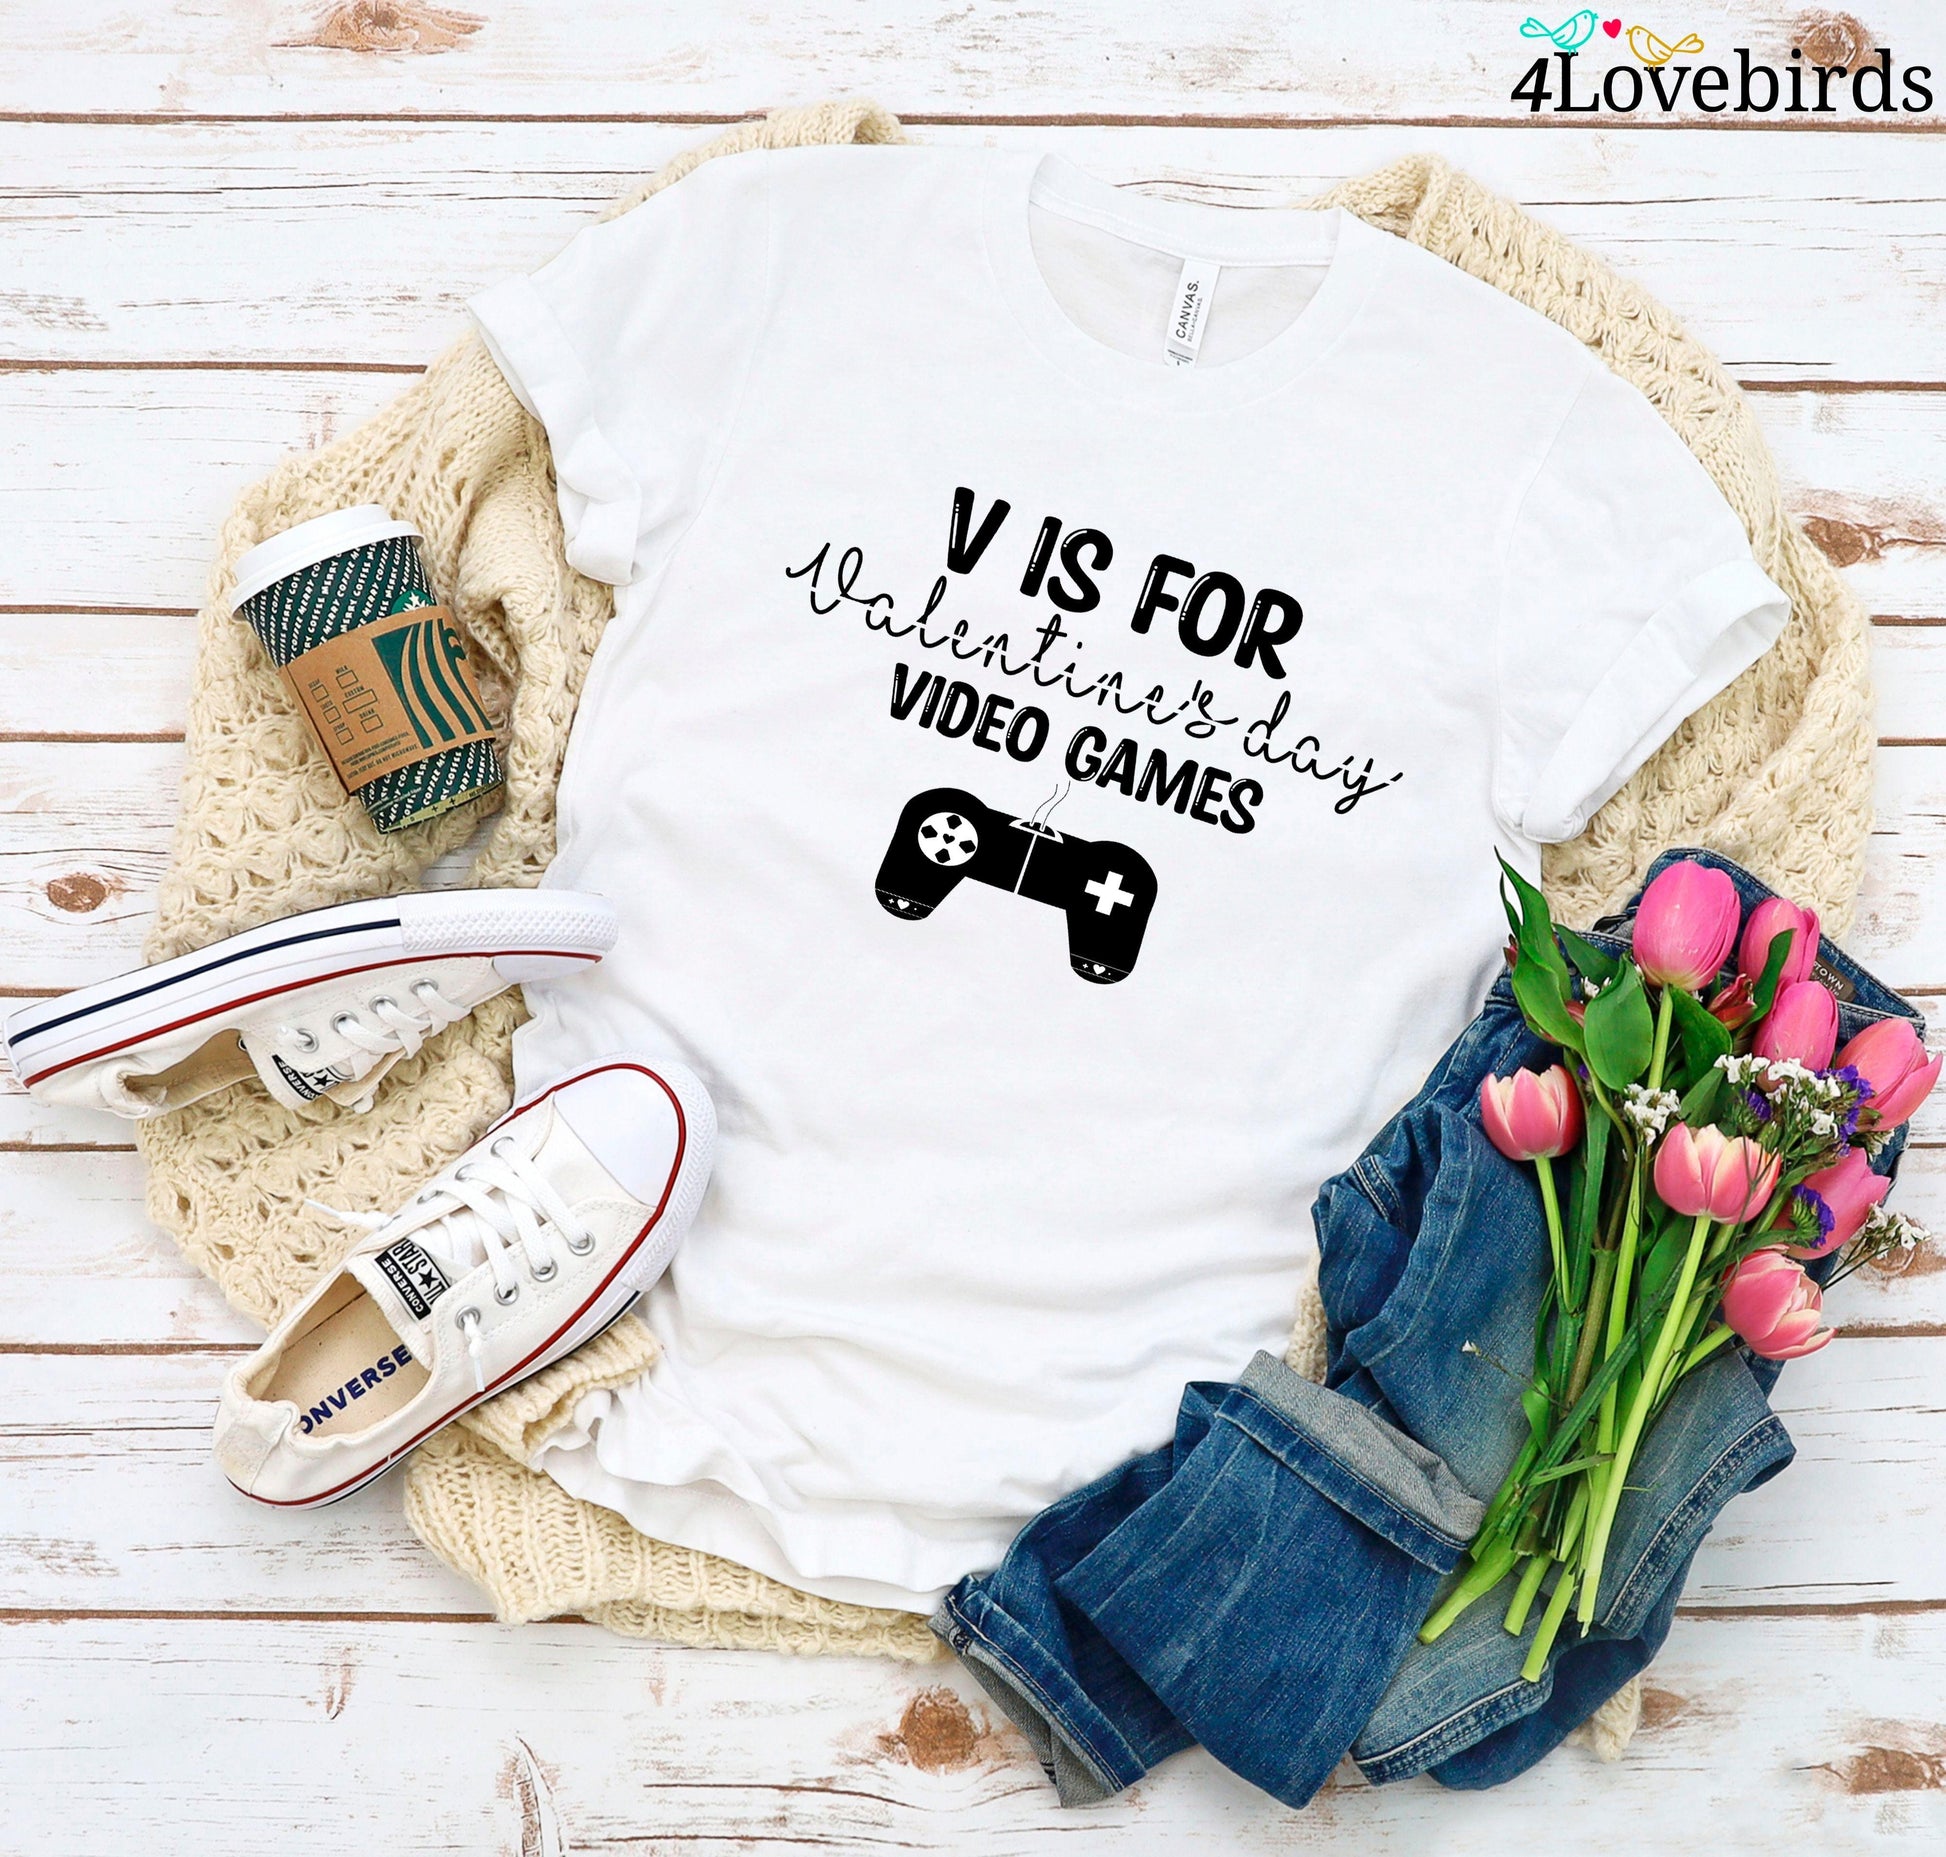 V Is For Video Games - Valentine's Day Kids' Youth Long and Short Sleeve Hoodie - 4Lovebirds